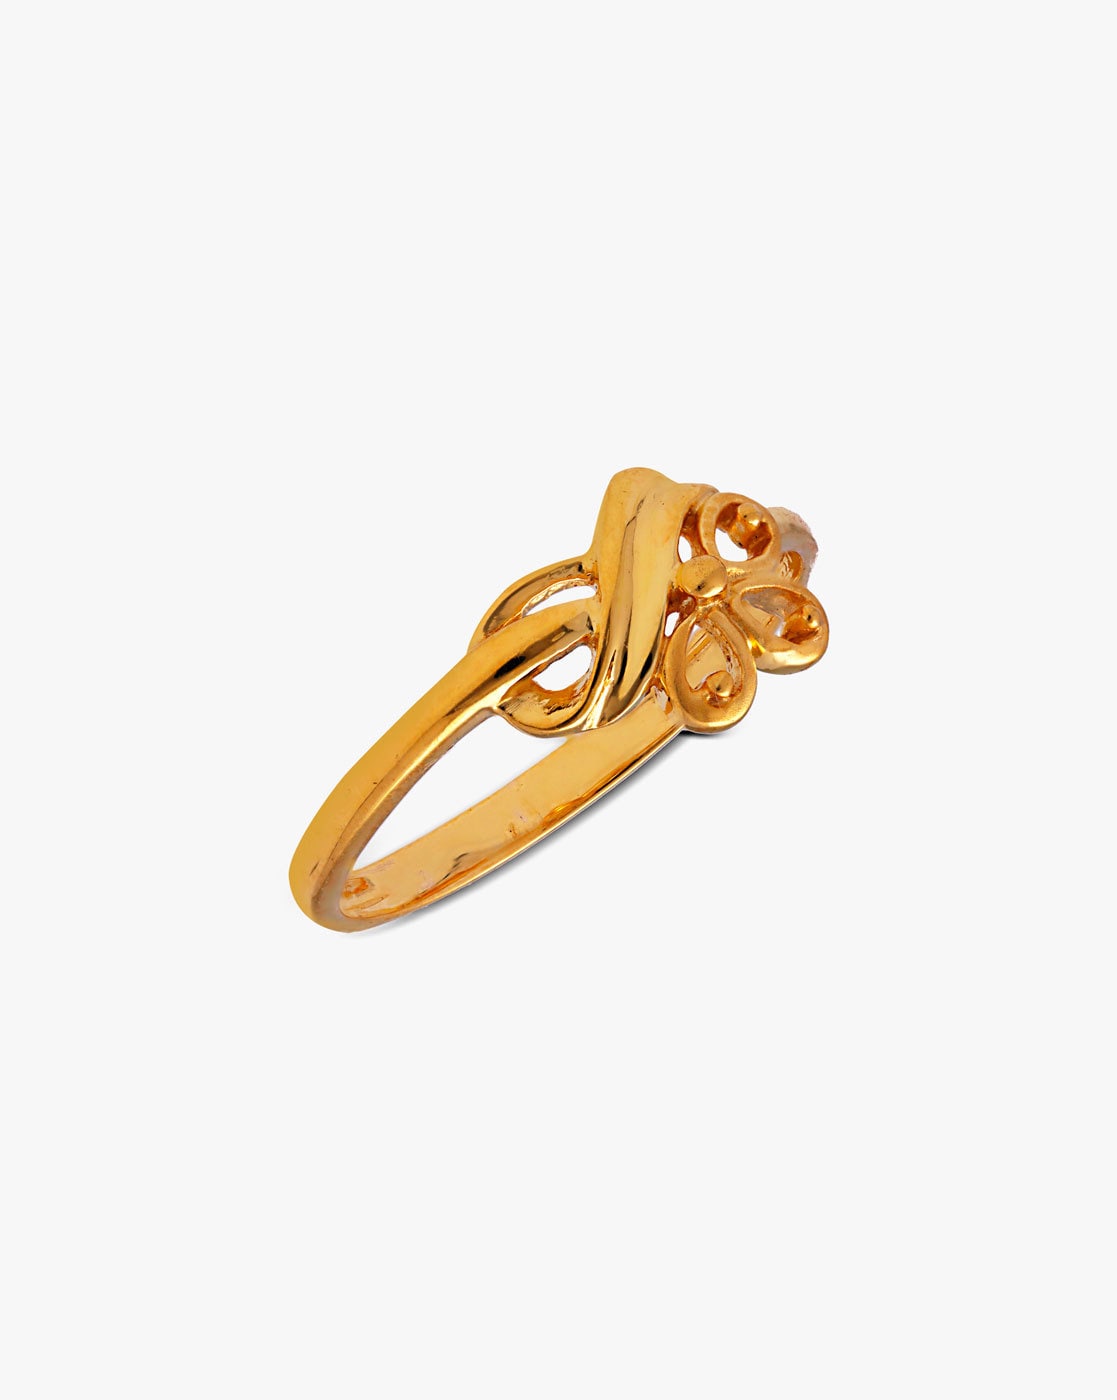 RINGCOLLECTION Be the queen of the rings. Reliance Jewels Be The Moment.  www.reliancejewels.com #r… | Latest ring designs, Latest gold ring designs,  Ring designs